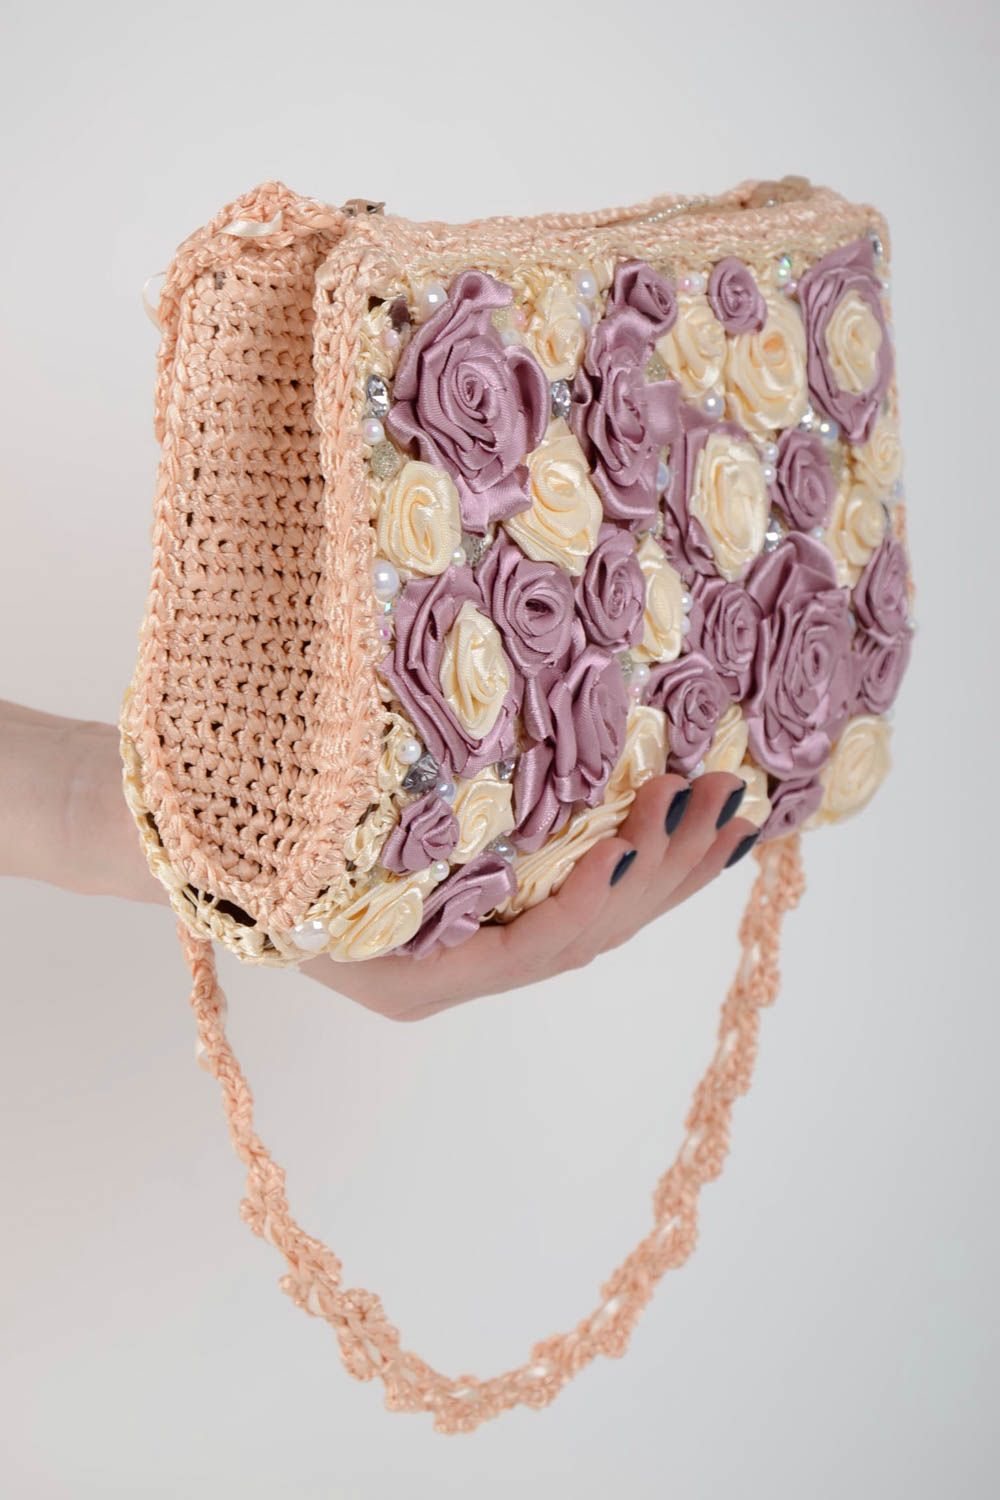 Handmade designer light crocheted clutch bag with pink and violet ribbon flowers photo 5